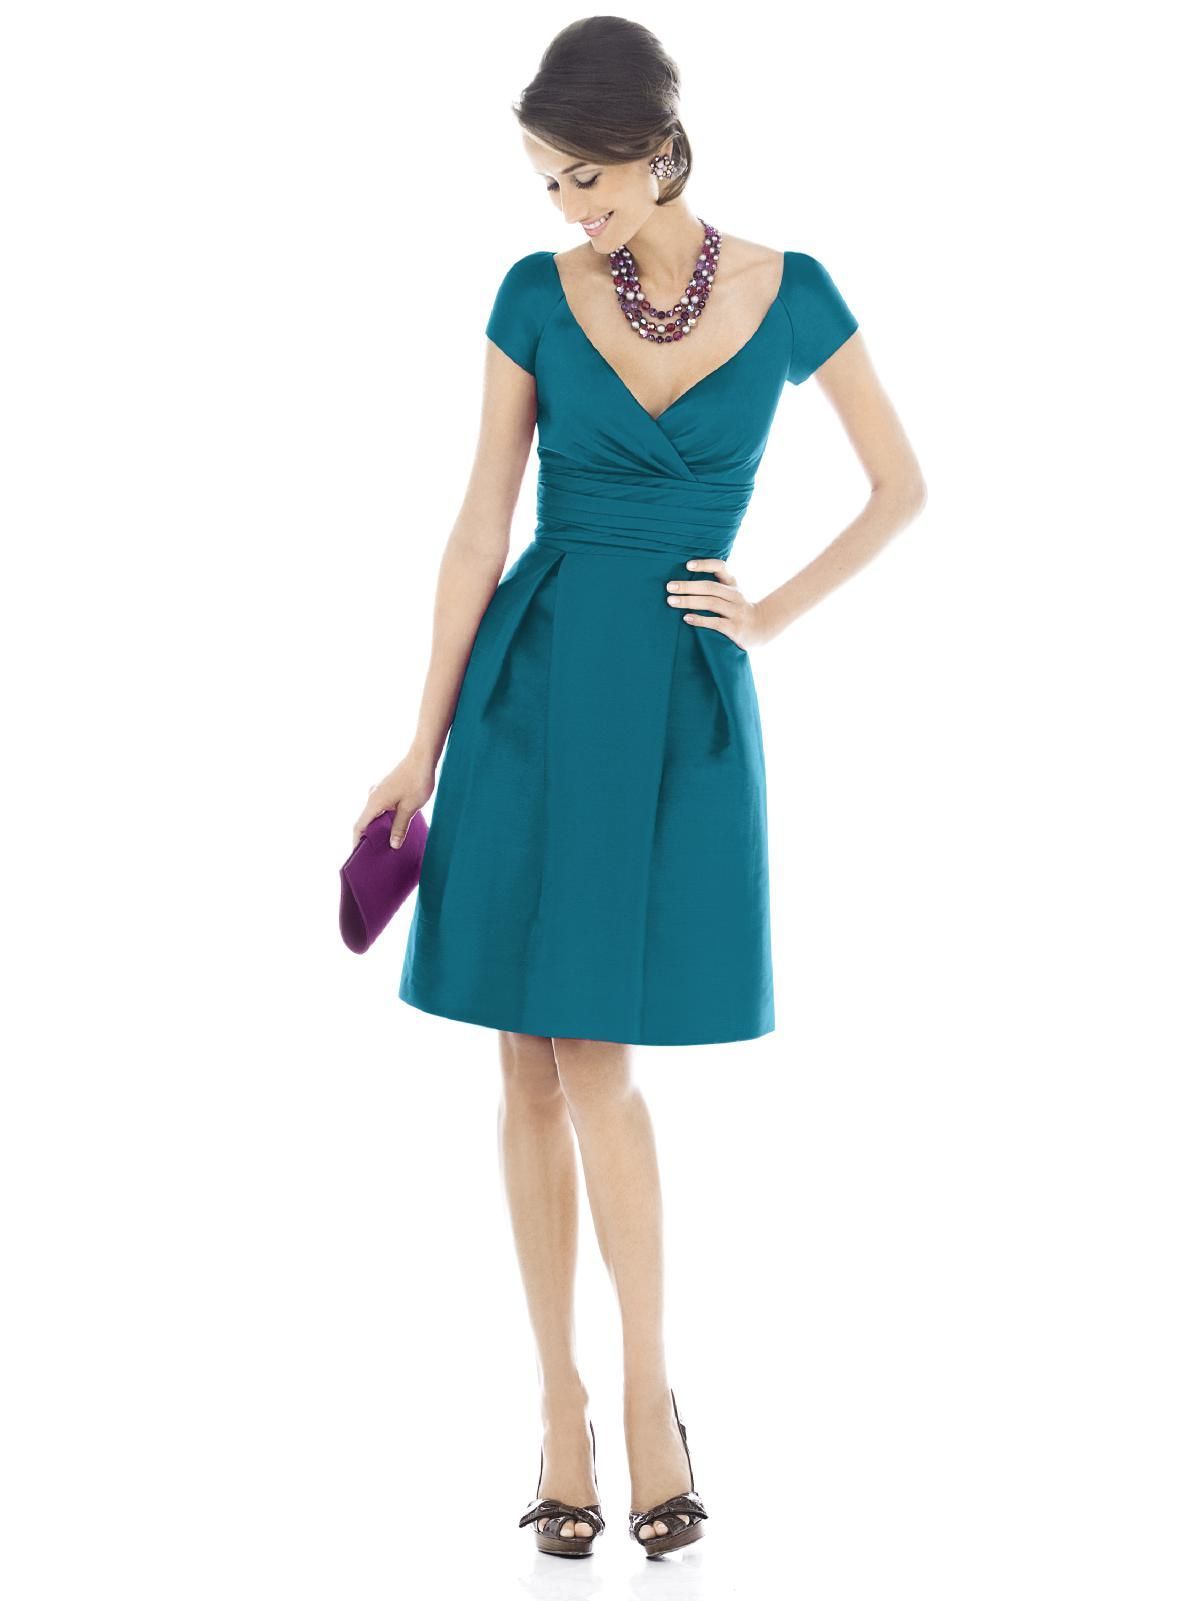 Teal Bridesmaid Dress (Many other colors available, too)